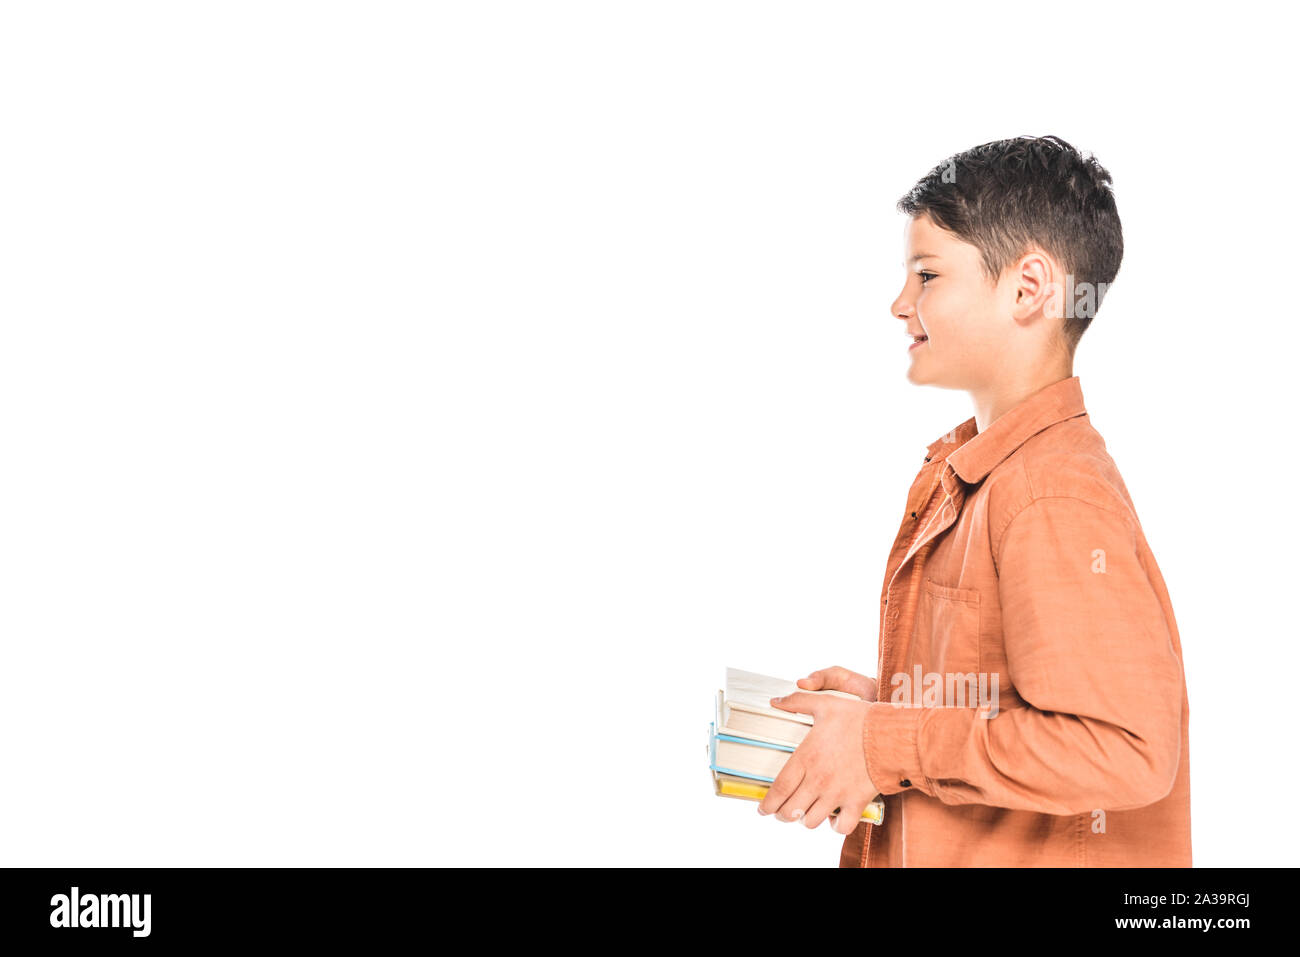 side view of smiling kid in shirt holding books isolated on white Stock Photo